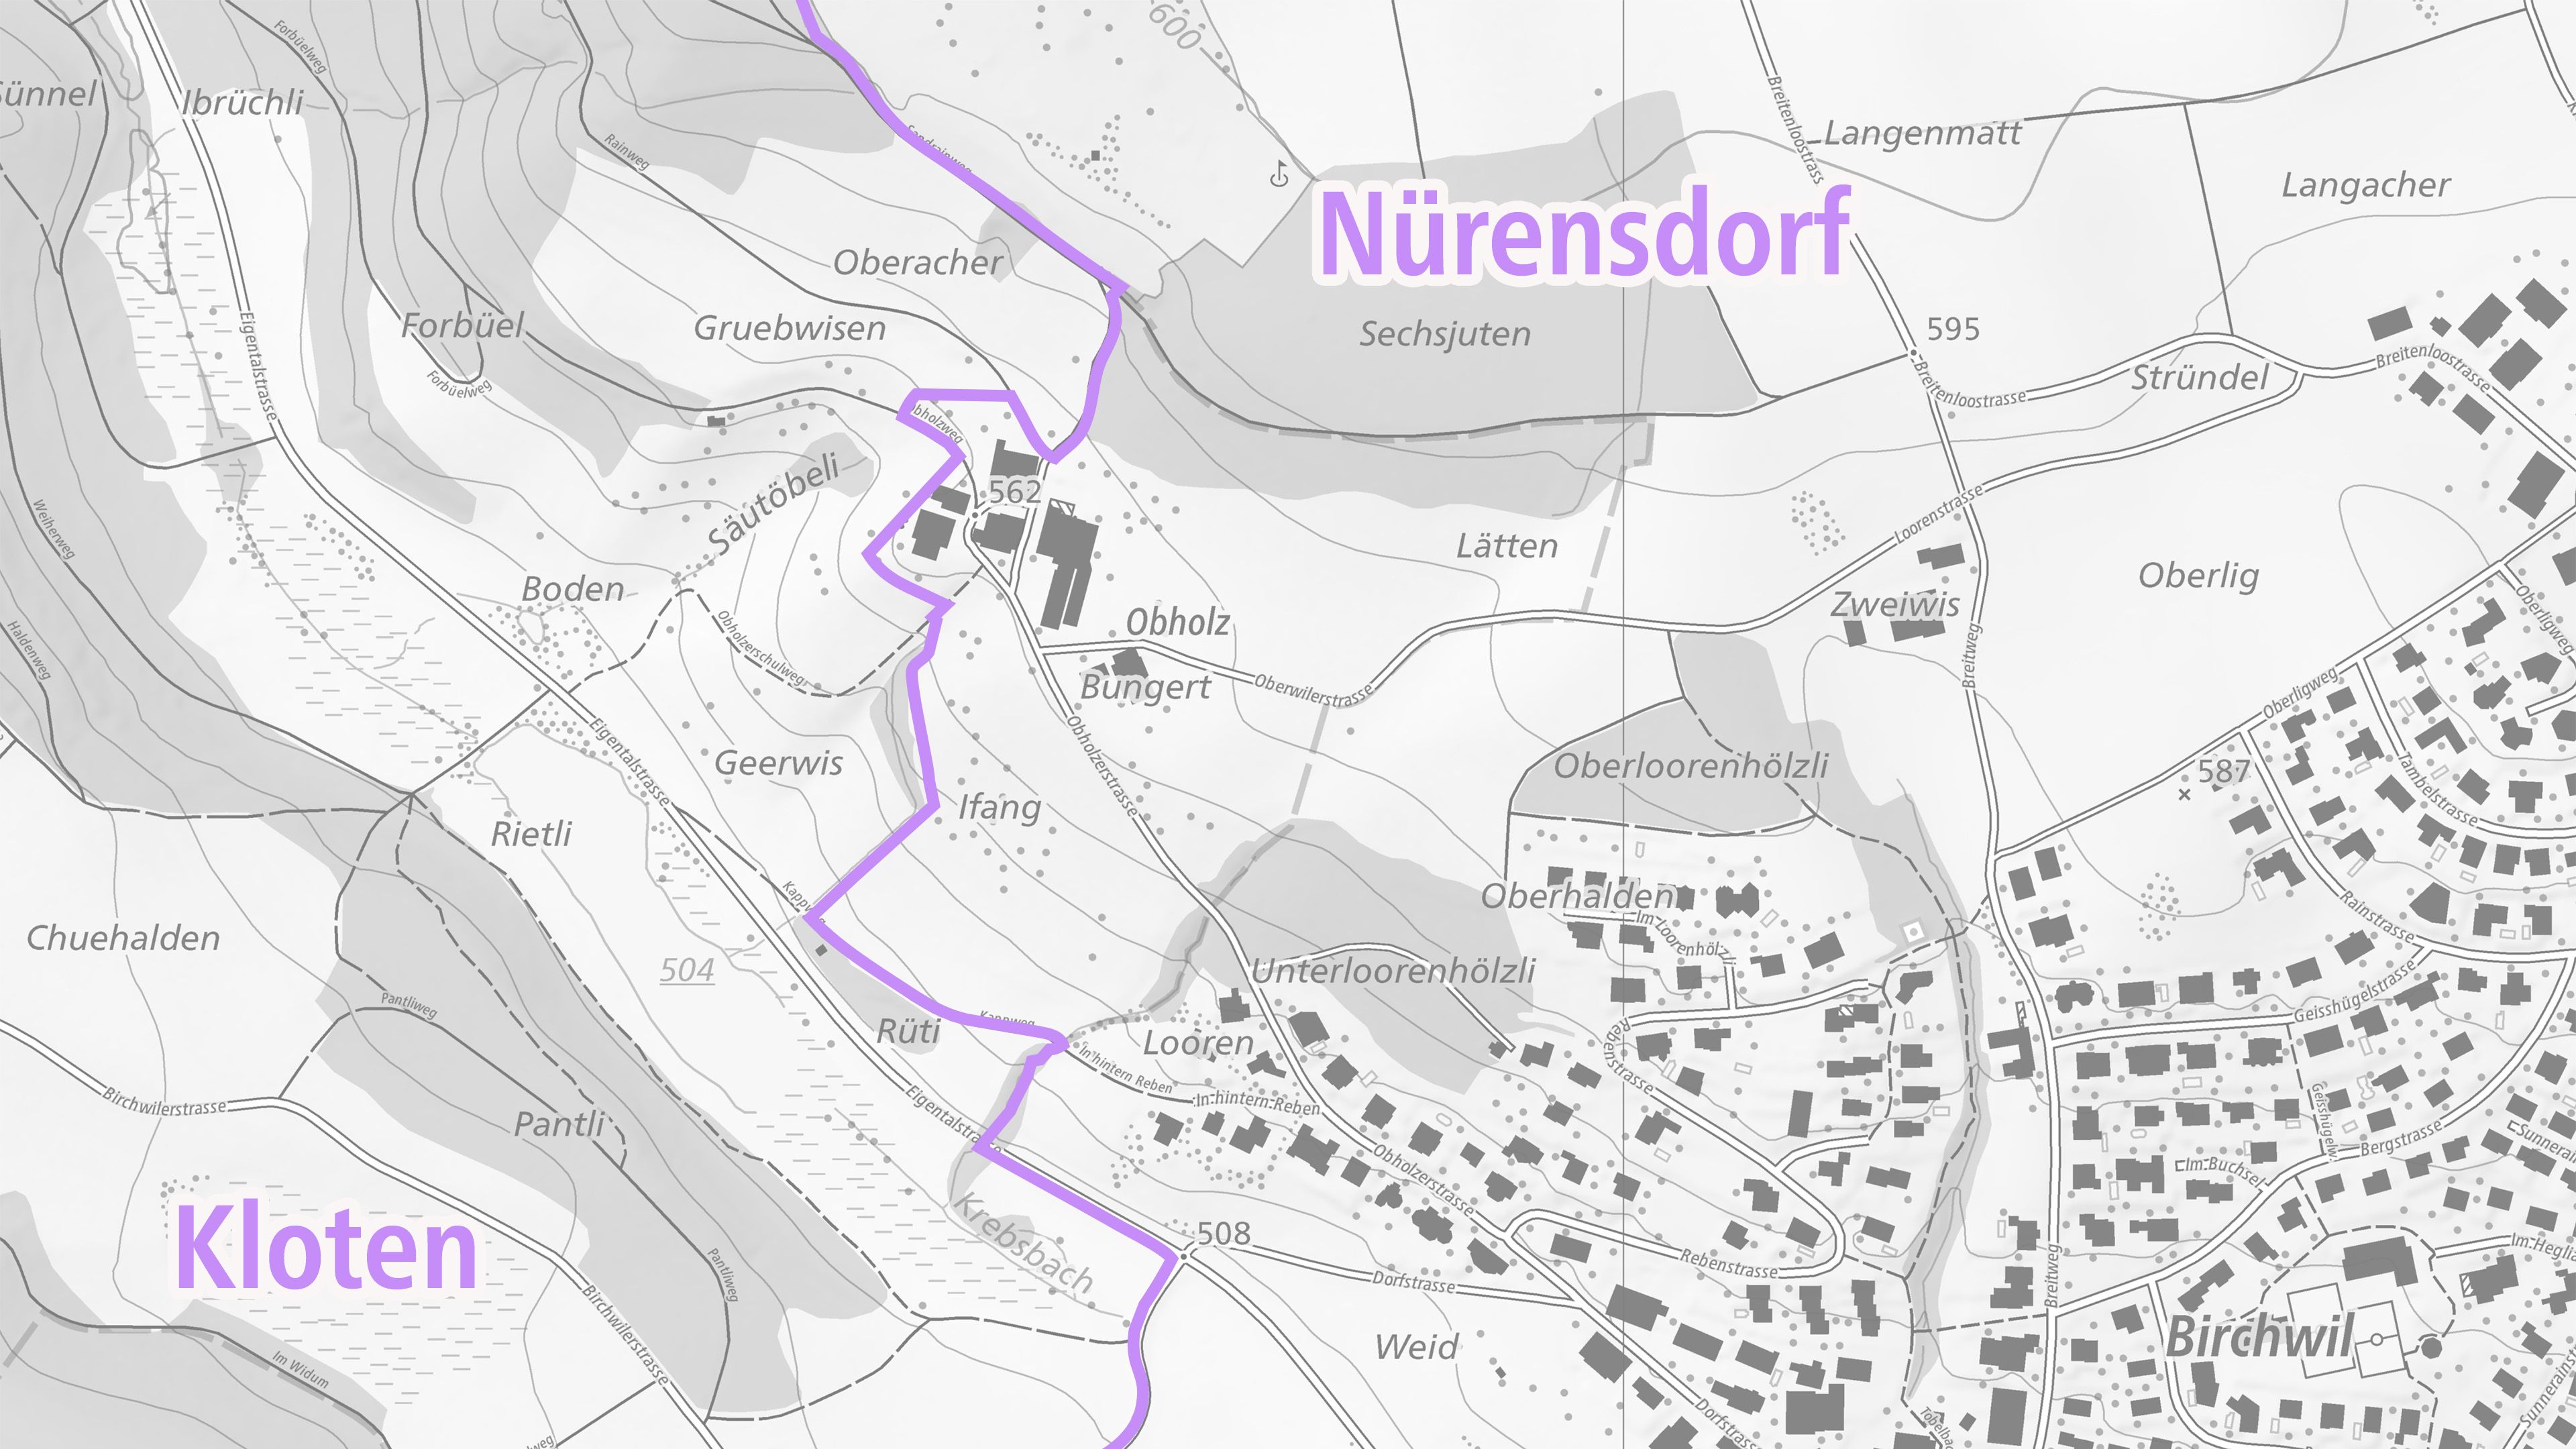 The image shows the new border between the municipalities of Kloten and Nürensdorf on a gray national map from swisstopo.